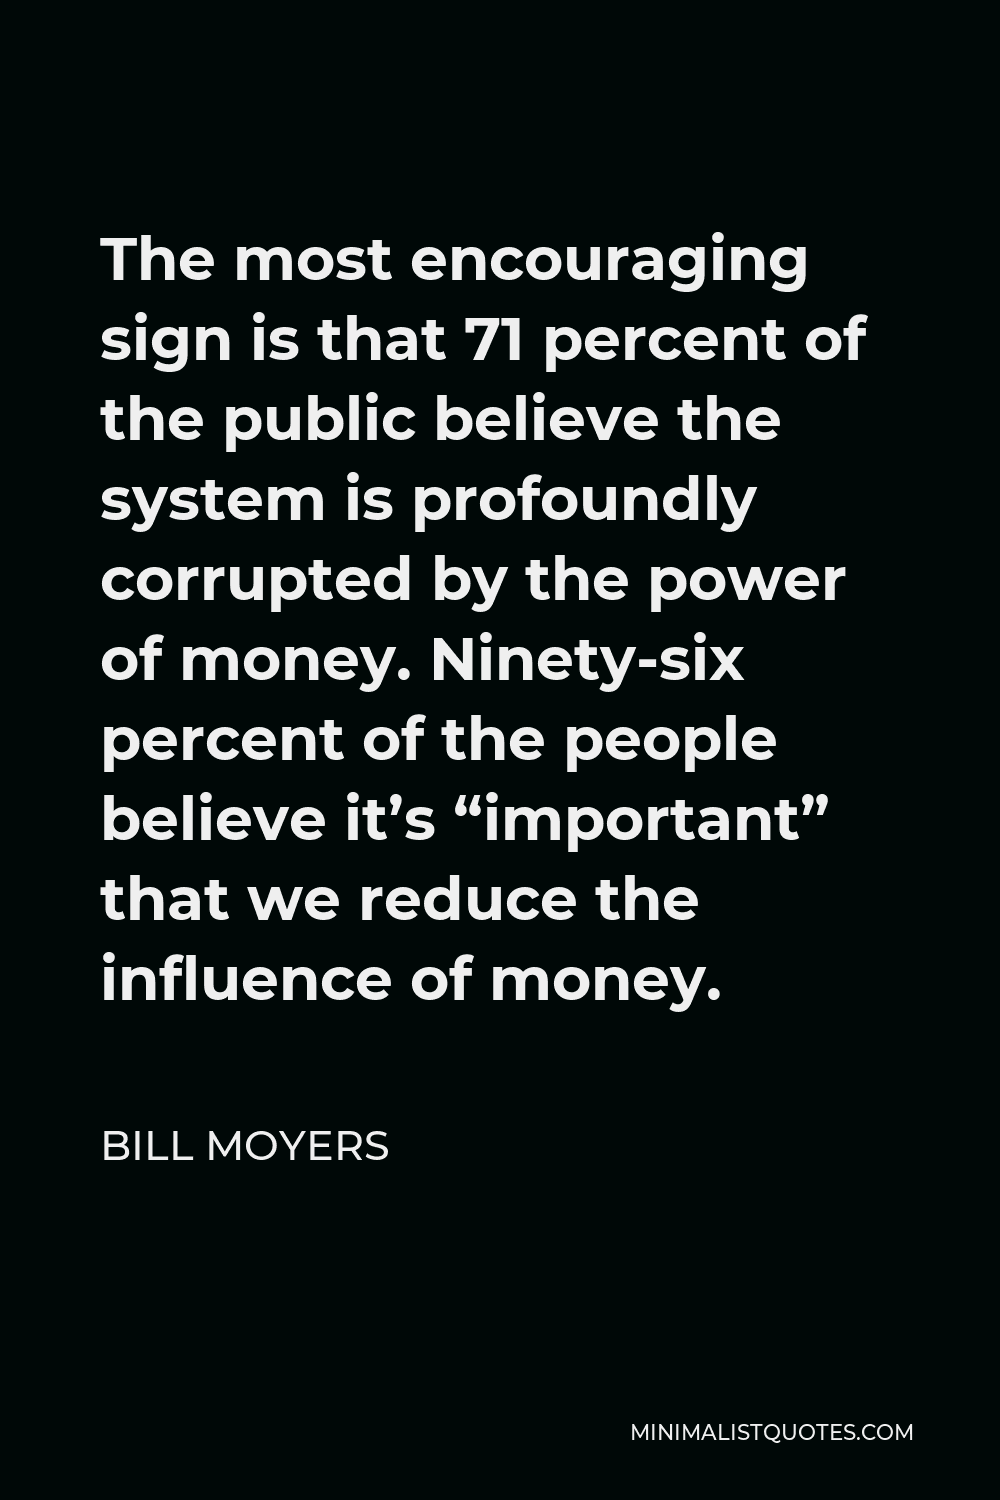 Bill Moyers Quote - The most encouraging sign is that 71 percent of the public believe the system is profoundly corrupted by the power of money. Ninety-six percent of the people believe it’s “important” that we reduce the influence of money.